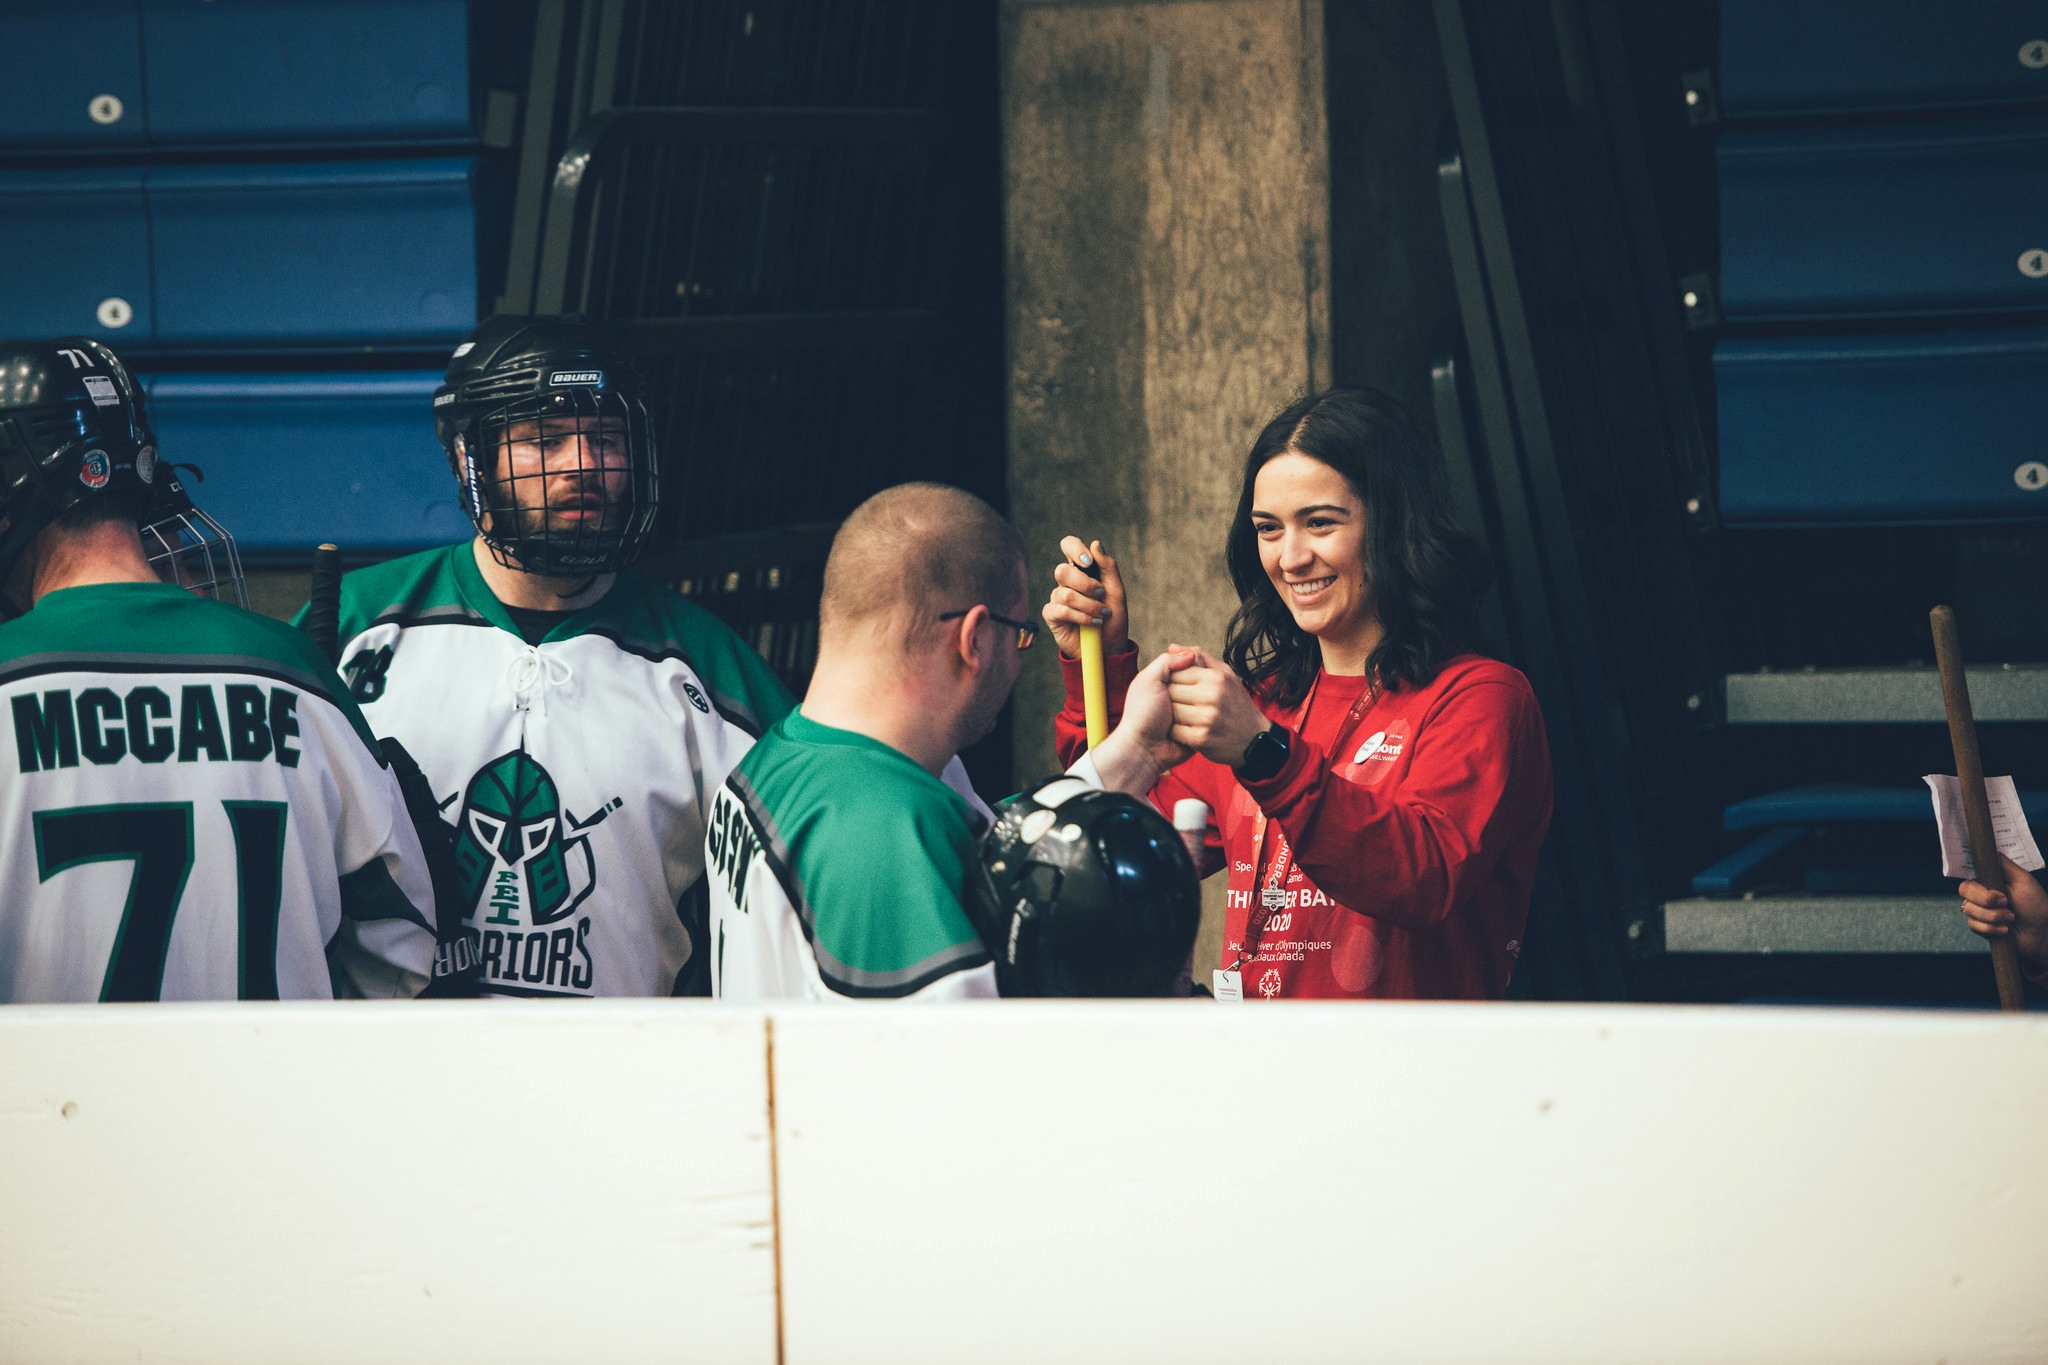 A volounter cheering with two hockey players